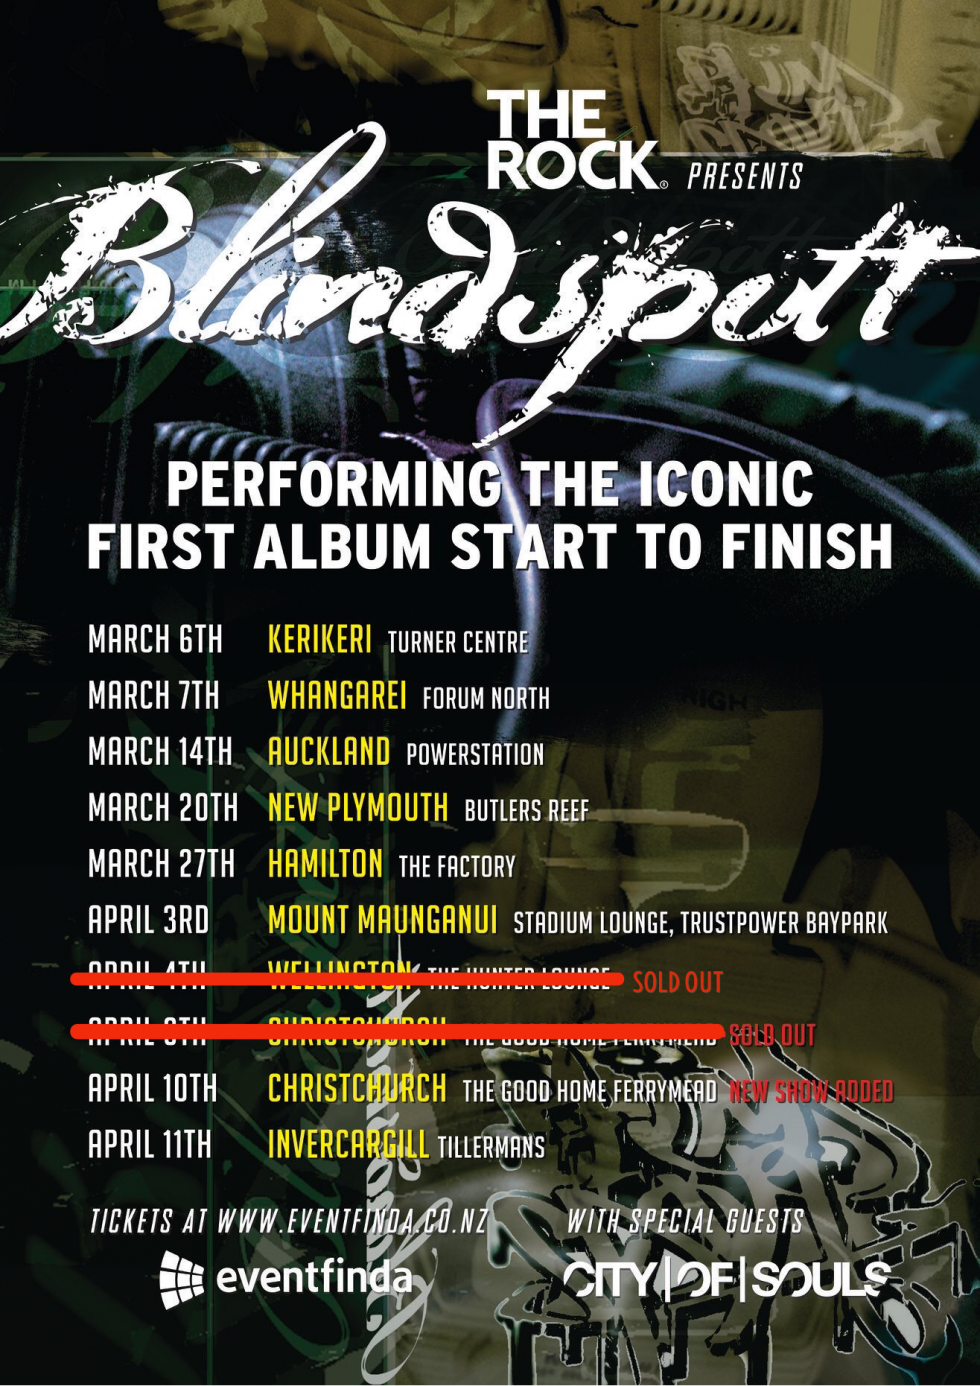 Blindspott have announced a tour and 2 shows are already SOLD OUT